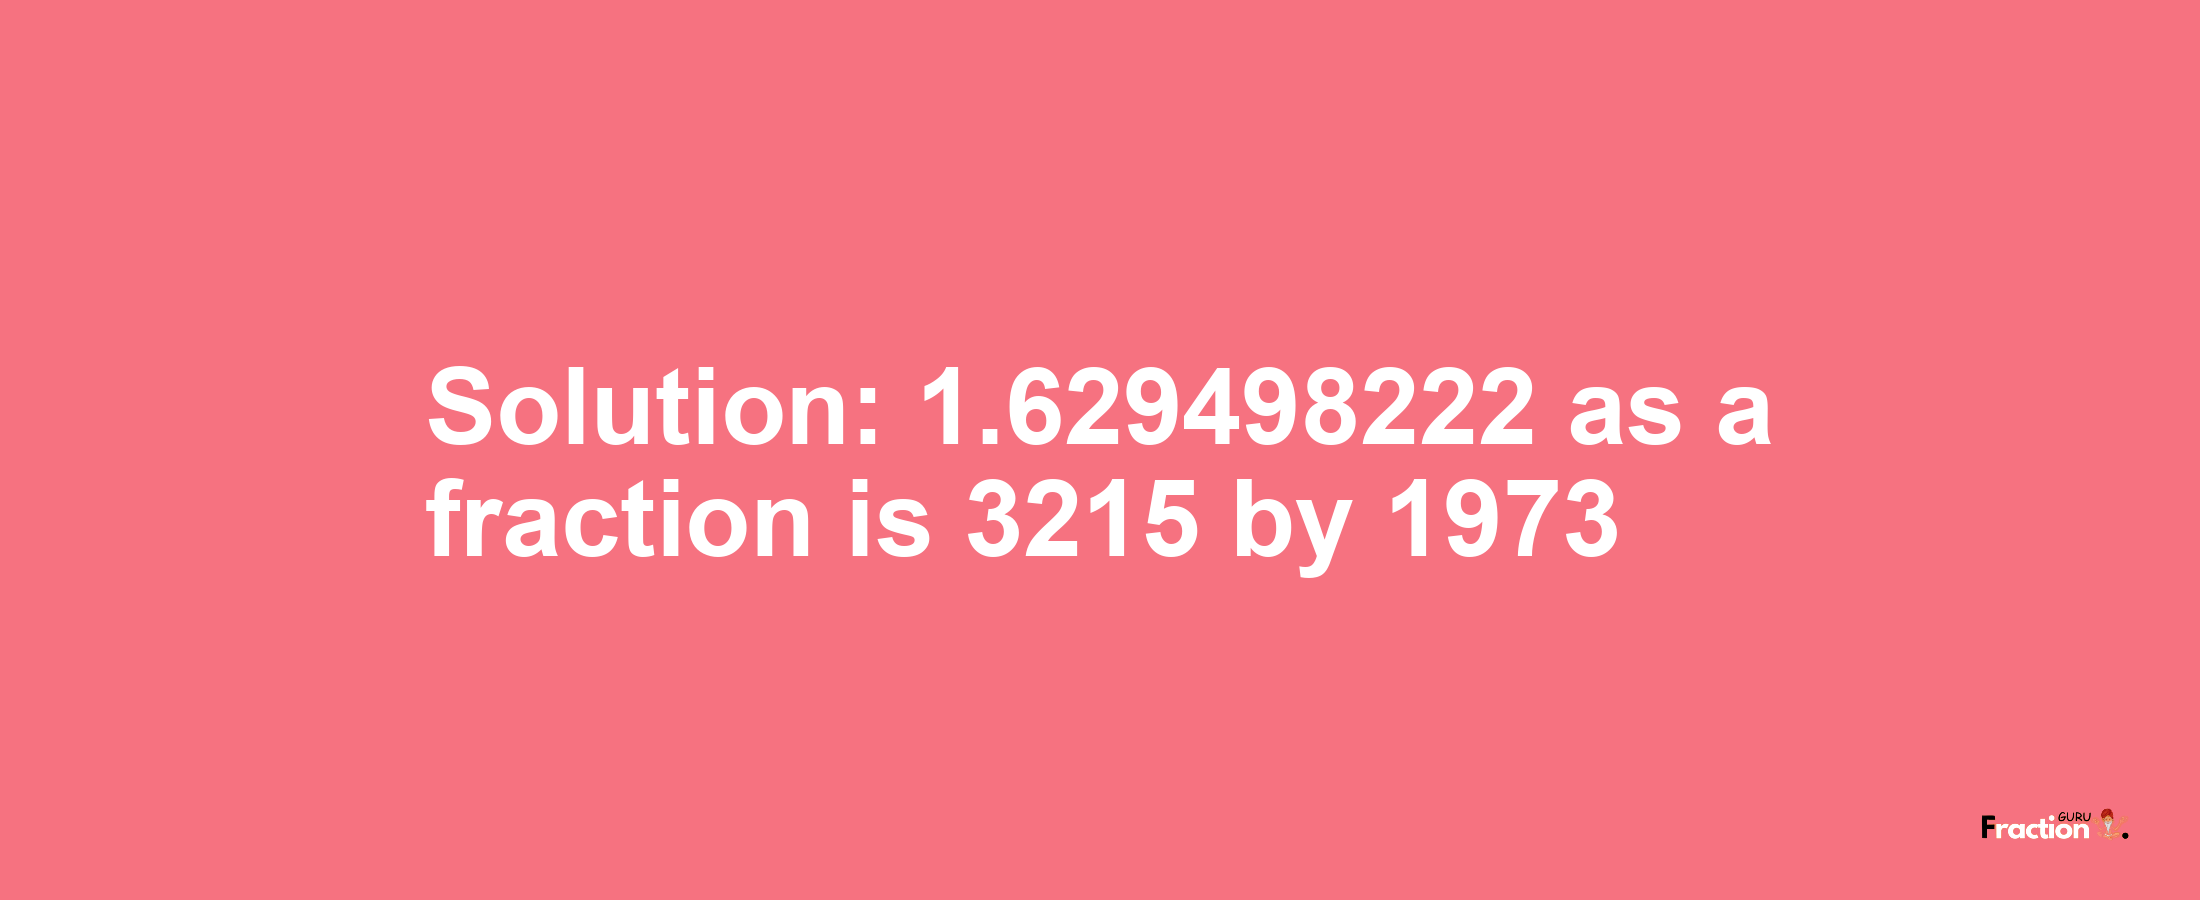 Solution:1.629498222 as a fraction is 3215/1973